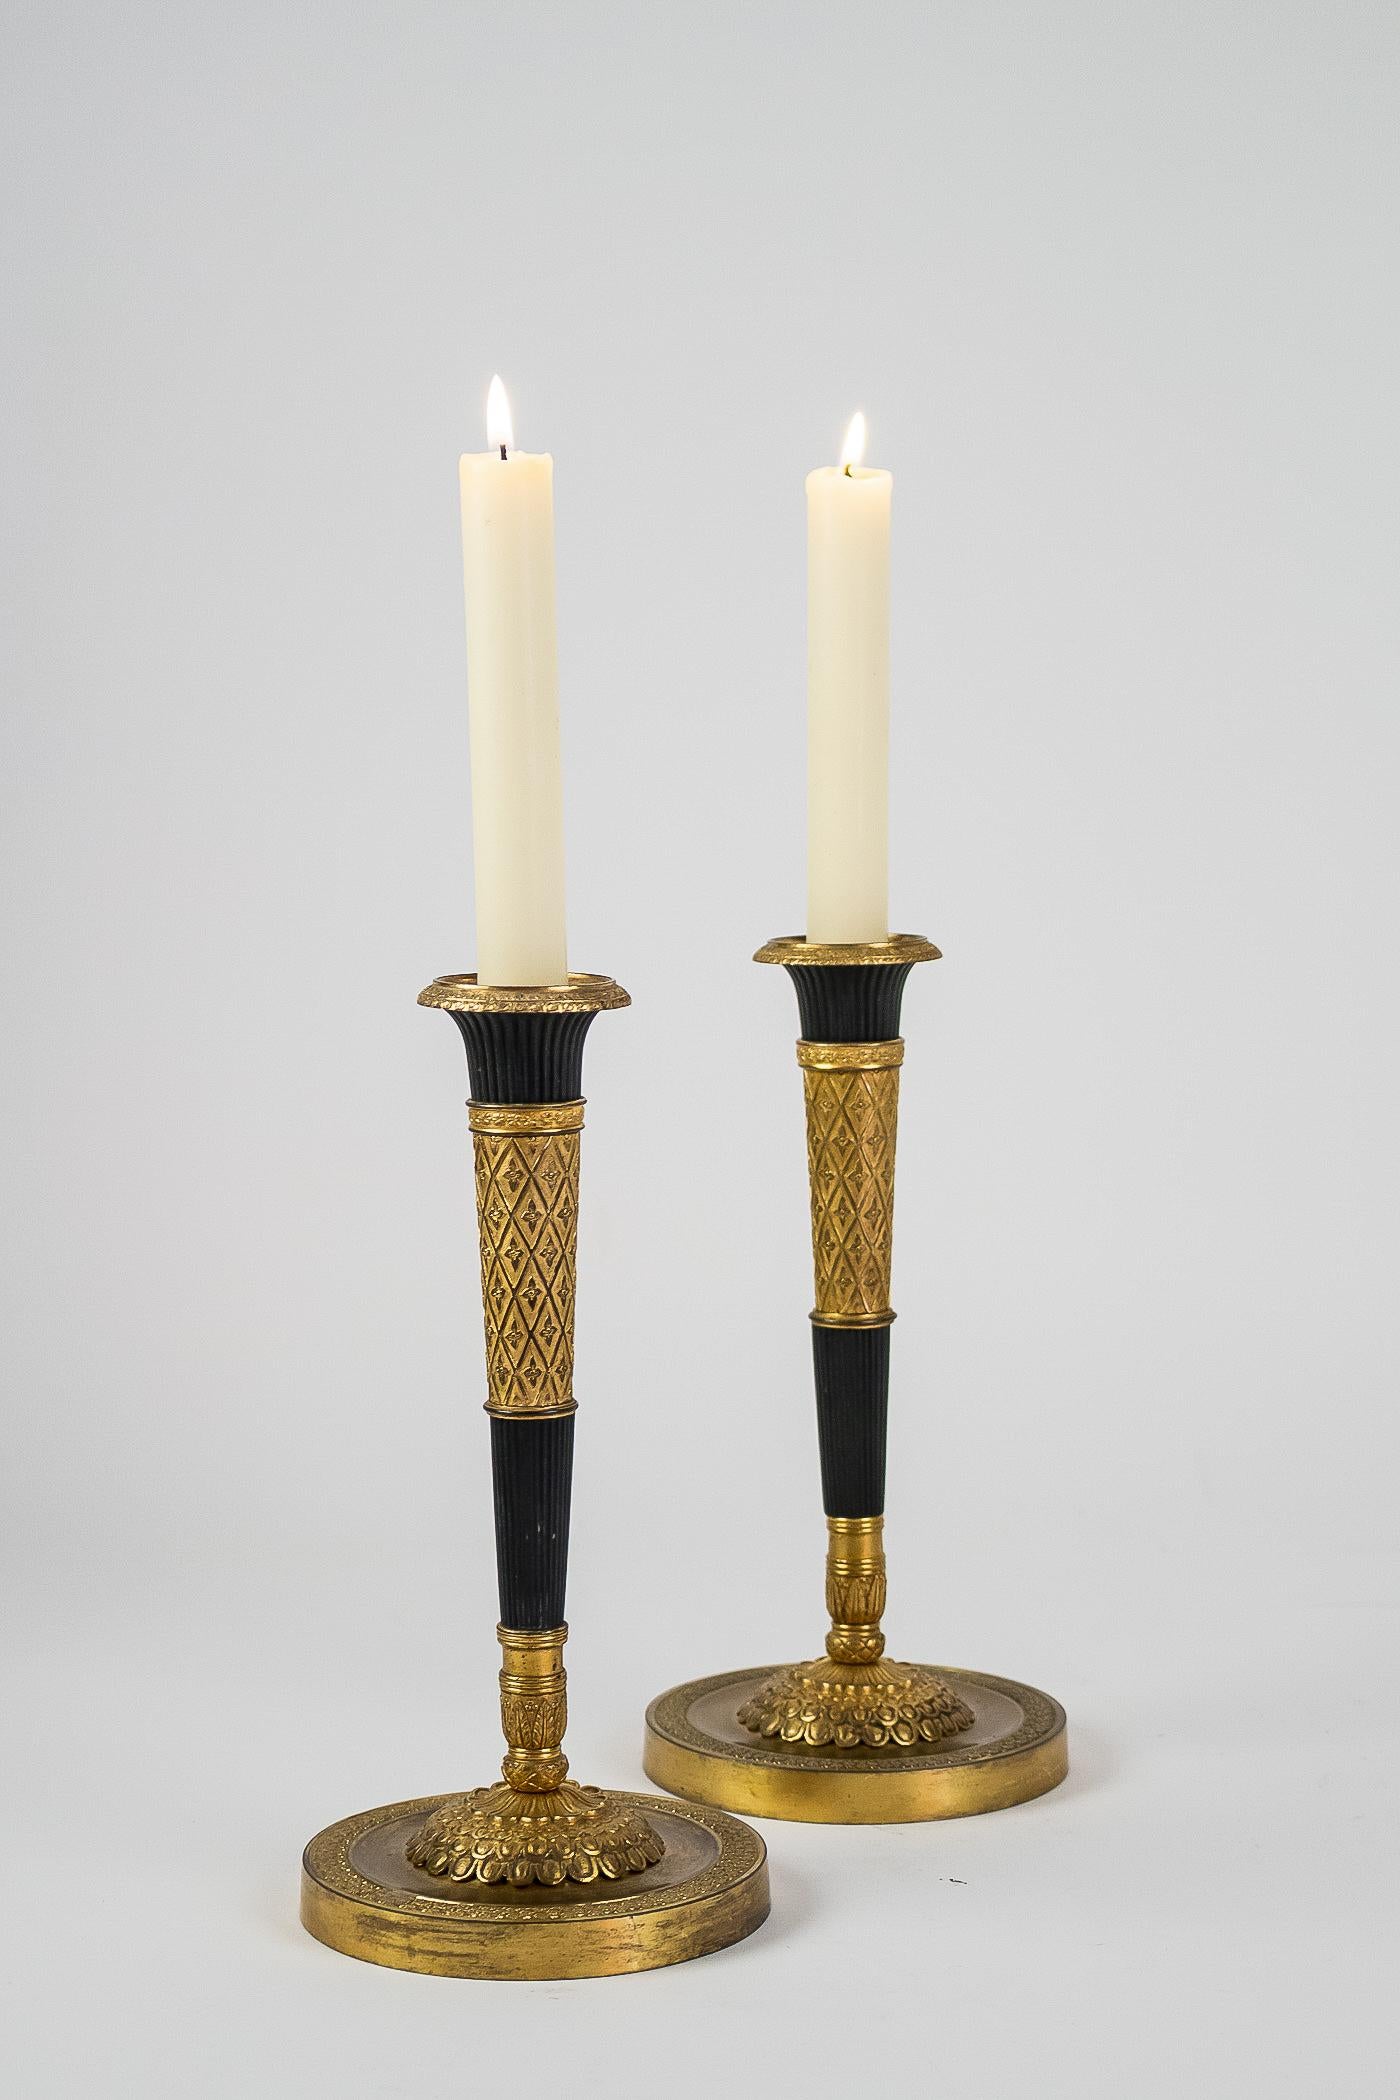 French Directoire Period Pair of French Candlesticks, circa 1798 For Sale 5